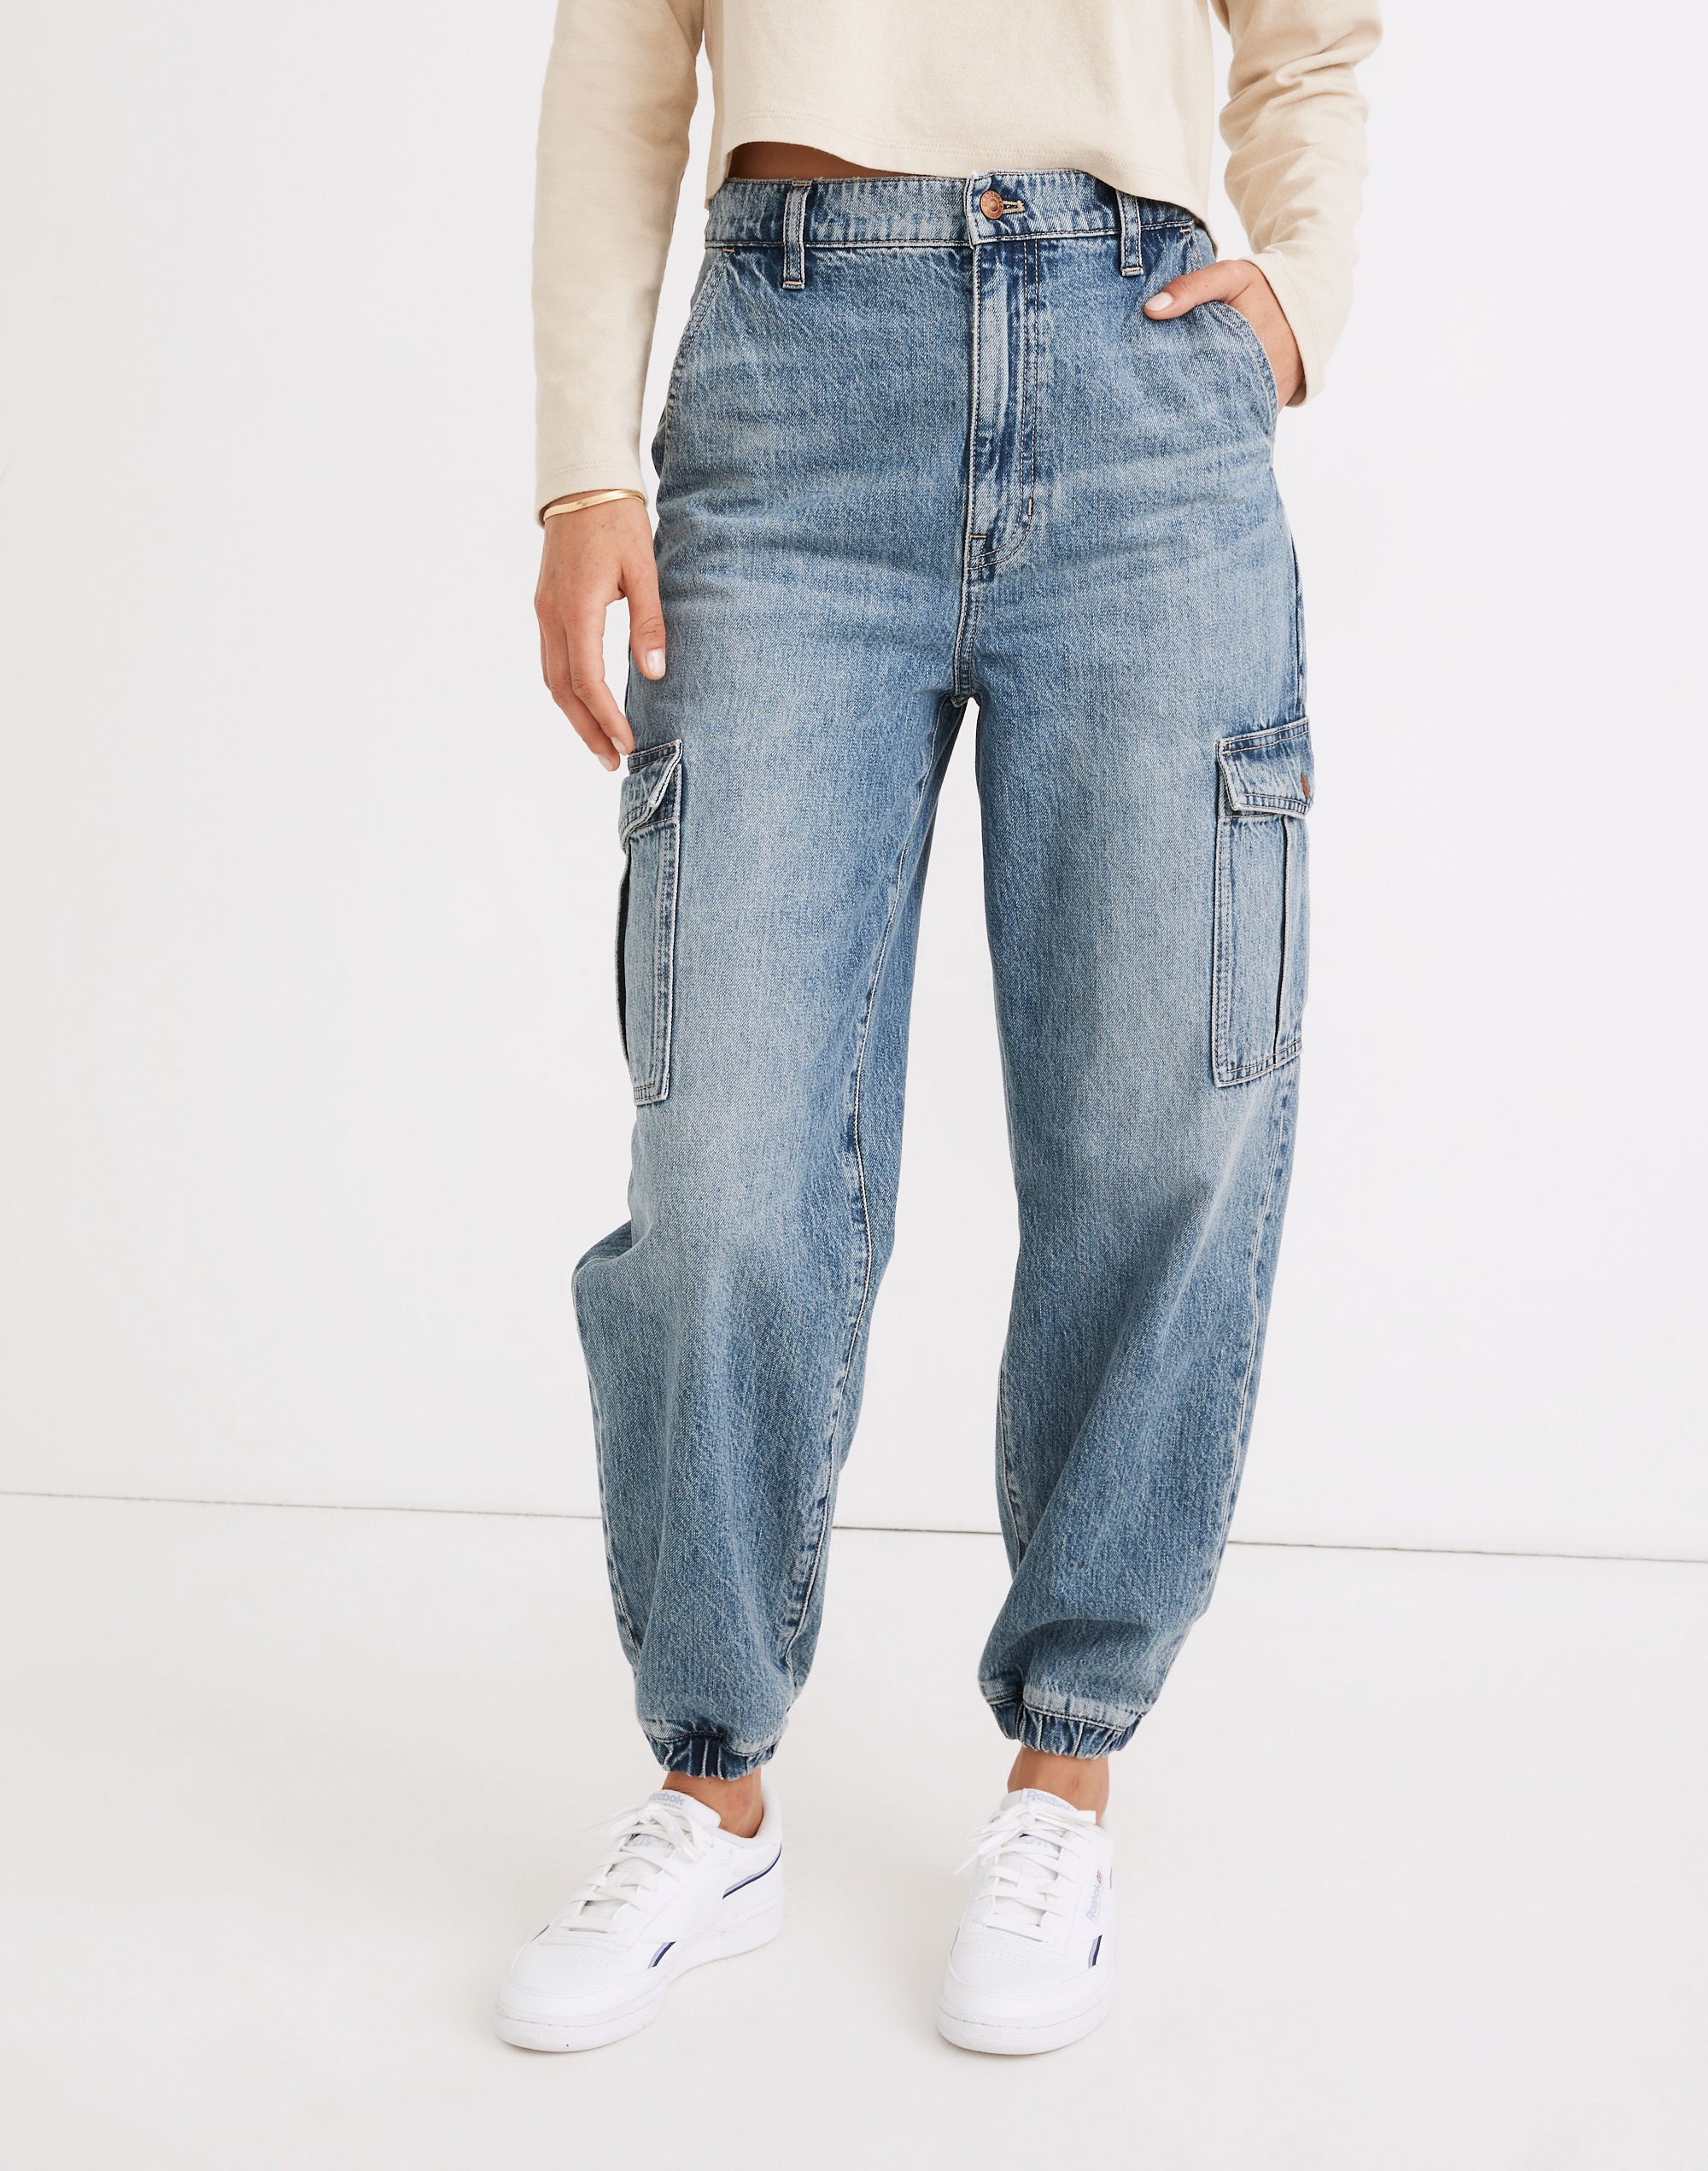 Cargo Jogger Jeans in Leegate Wash